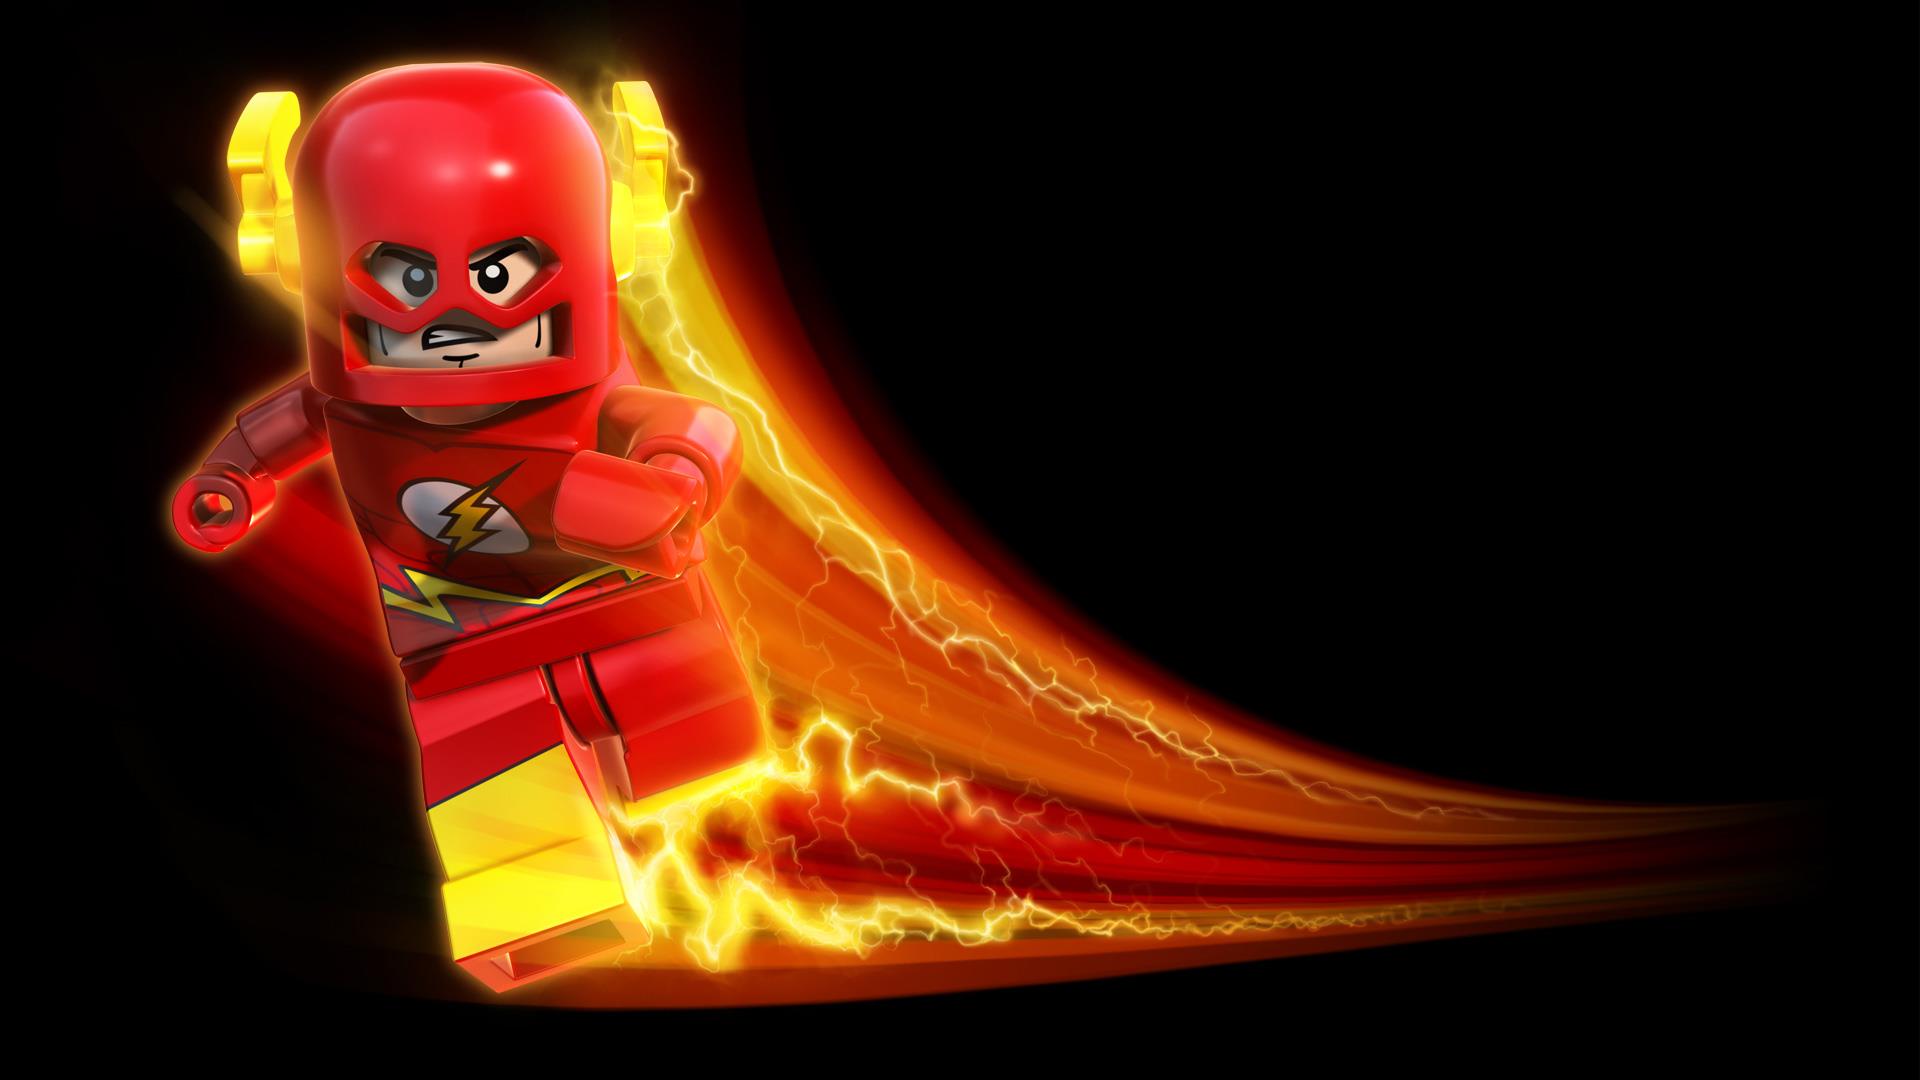  share this LEGO Flash my current favorite wallpaper wallpapers